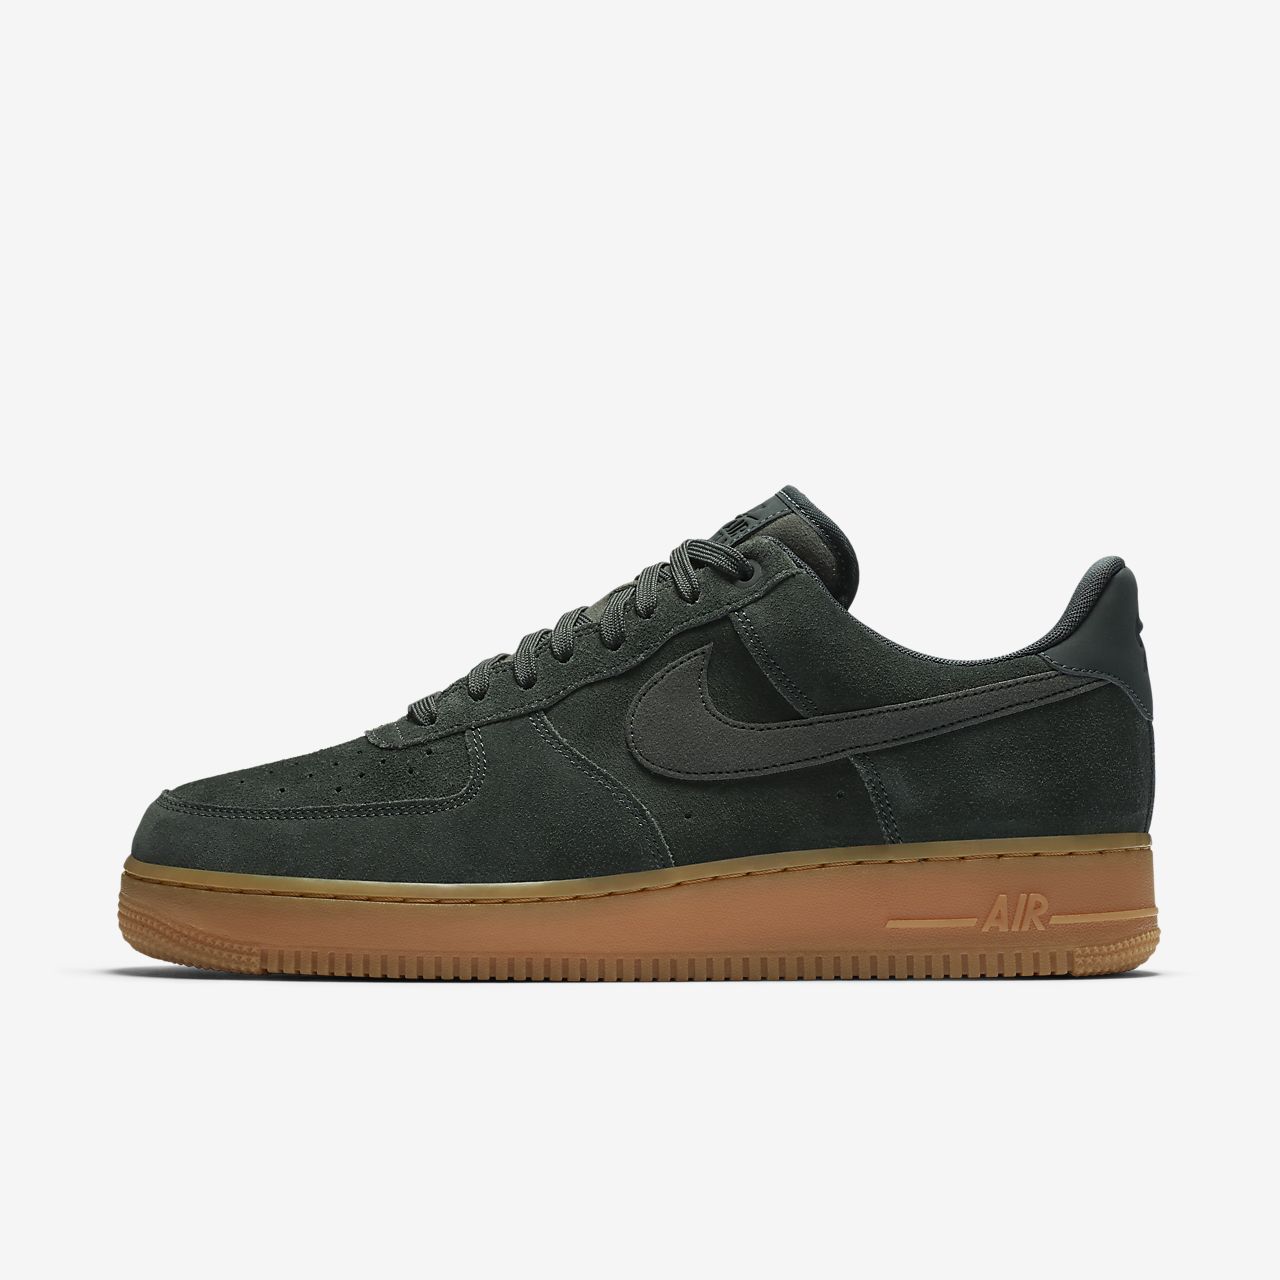 Chaussure Nike Air Force 1 07 LV8 Suede pour Homme